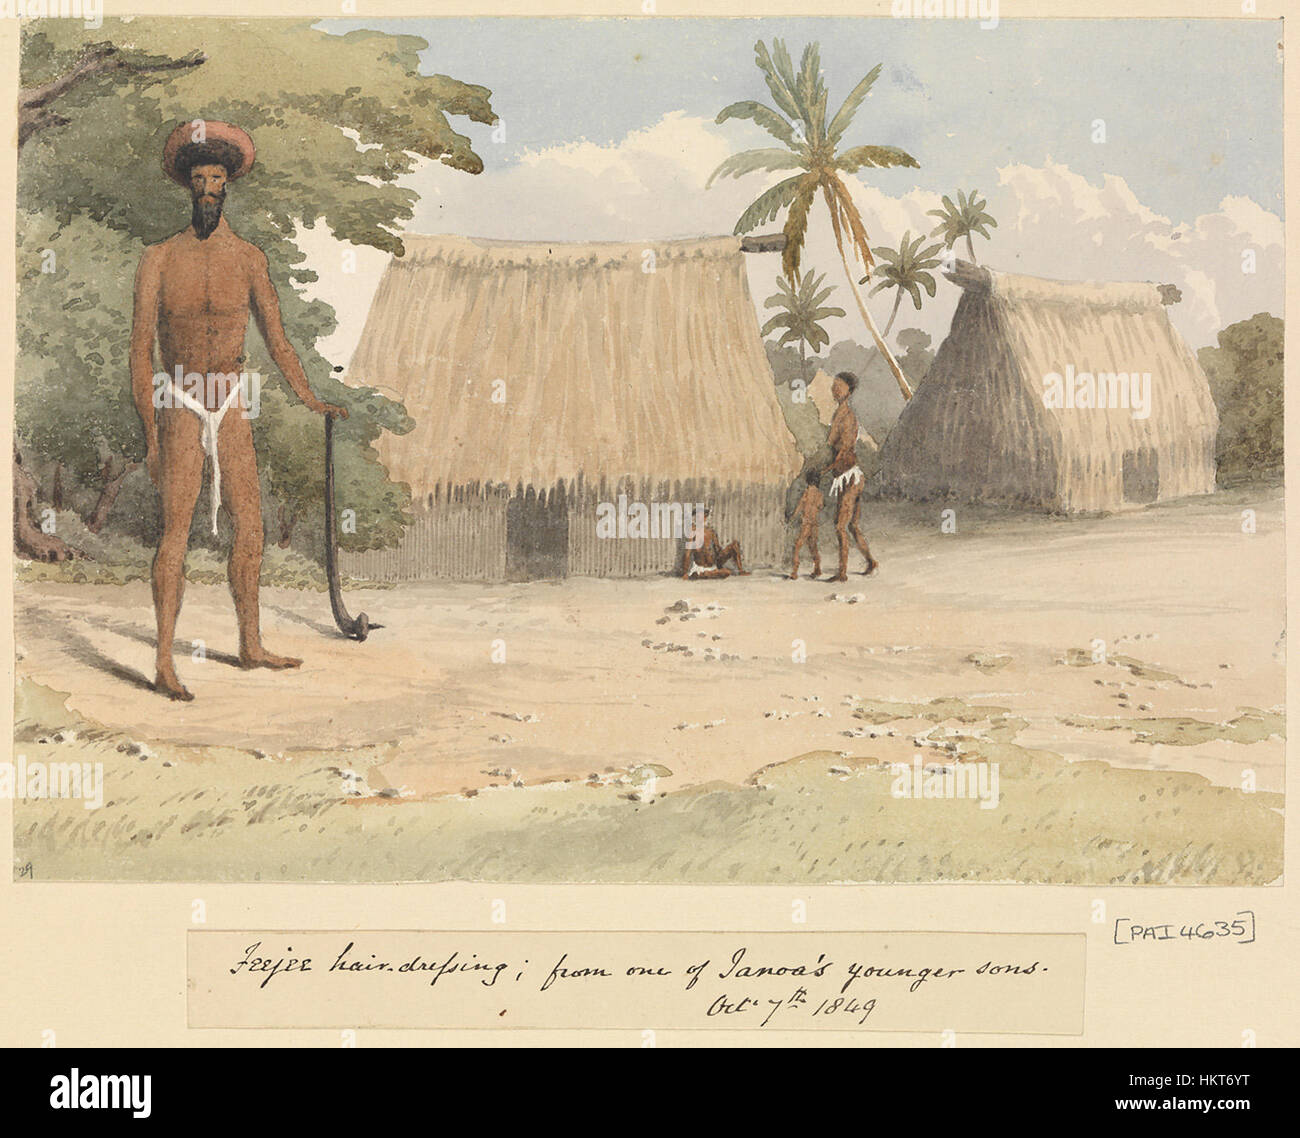 Edward Gennys Fanshawe, Feejee hair-dressing; from one Tanoa's younger sons, Octr 7th 1849 (Fiji) Stock Photo